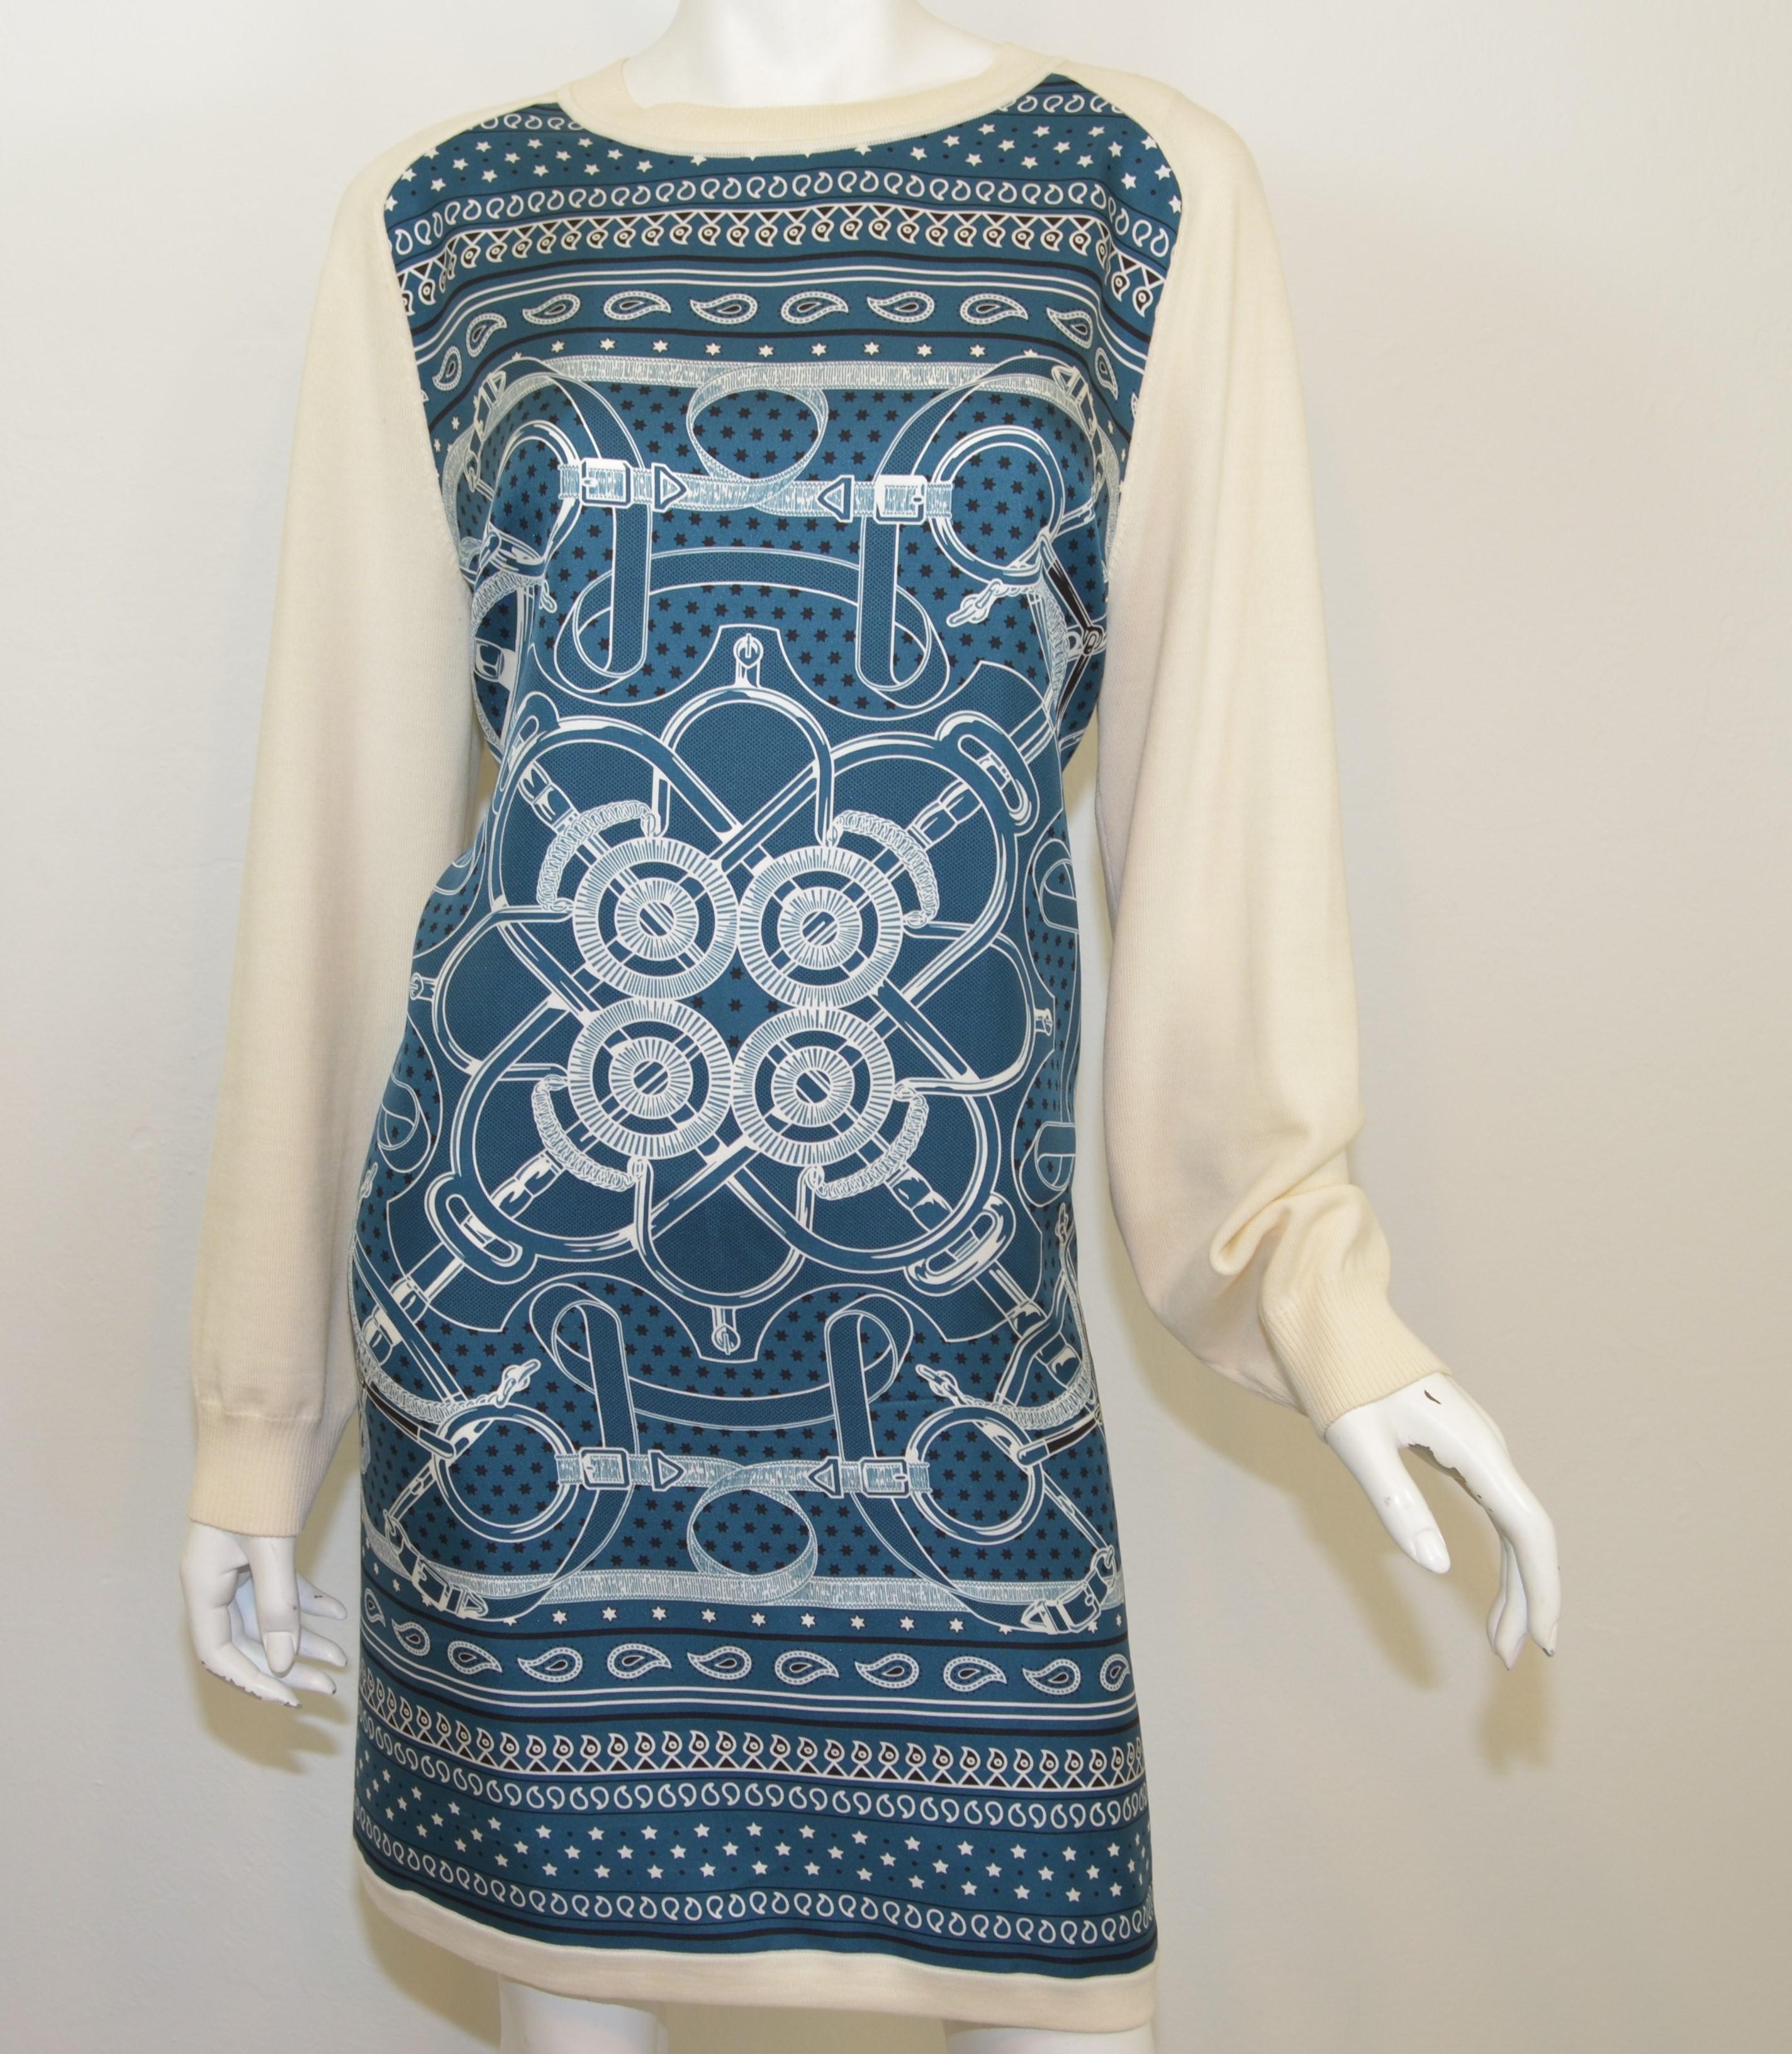 Hermes dress features a teal bandana print at the front composed with silk fabric with a cream-colored wool knit. Dress is labeled size 44, made in Italy. Excellent condition with the exception of a small spot on the left shoulder as